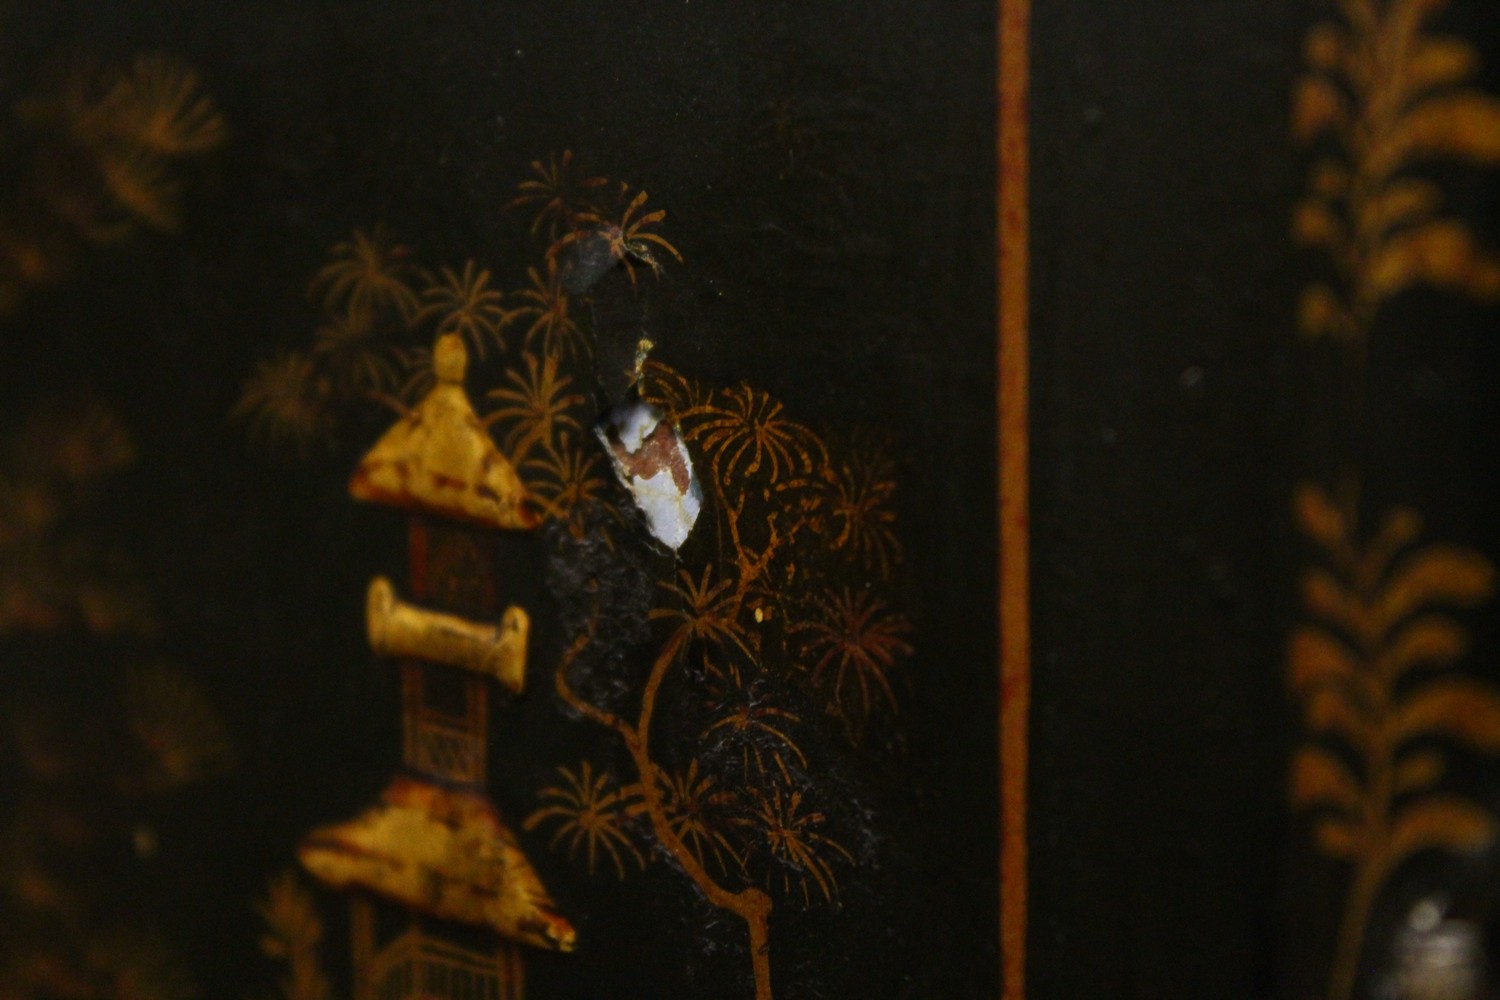 A GEORGE III CHINOISERIE DECORATED BLACK LACQUER LONGCASE CLOCK, by William Kipling, London, with - Image 26 of 26